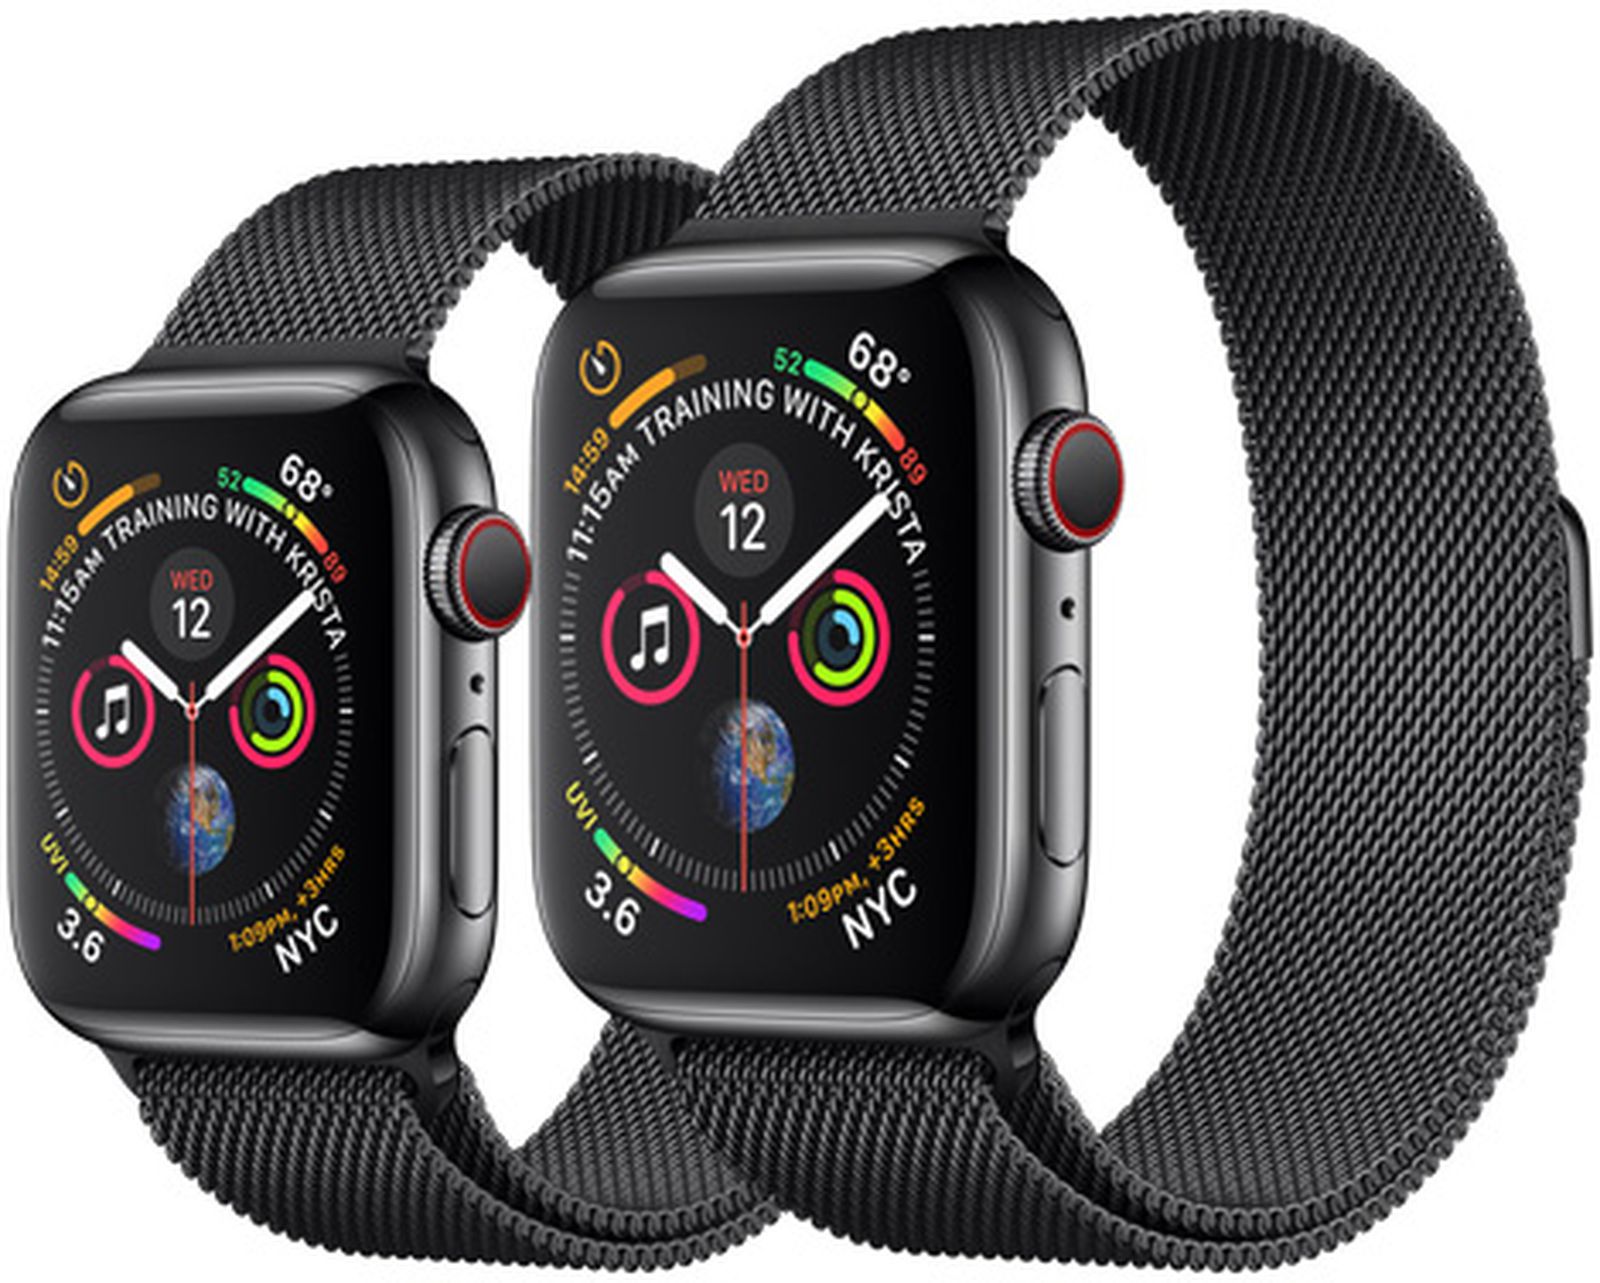 Is an Apple Watch with LTE Worth the Investment? 5